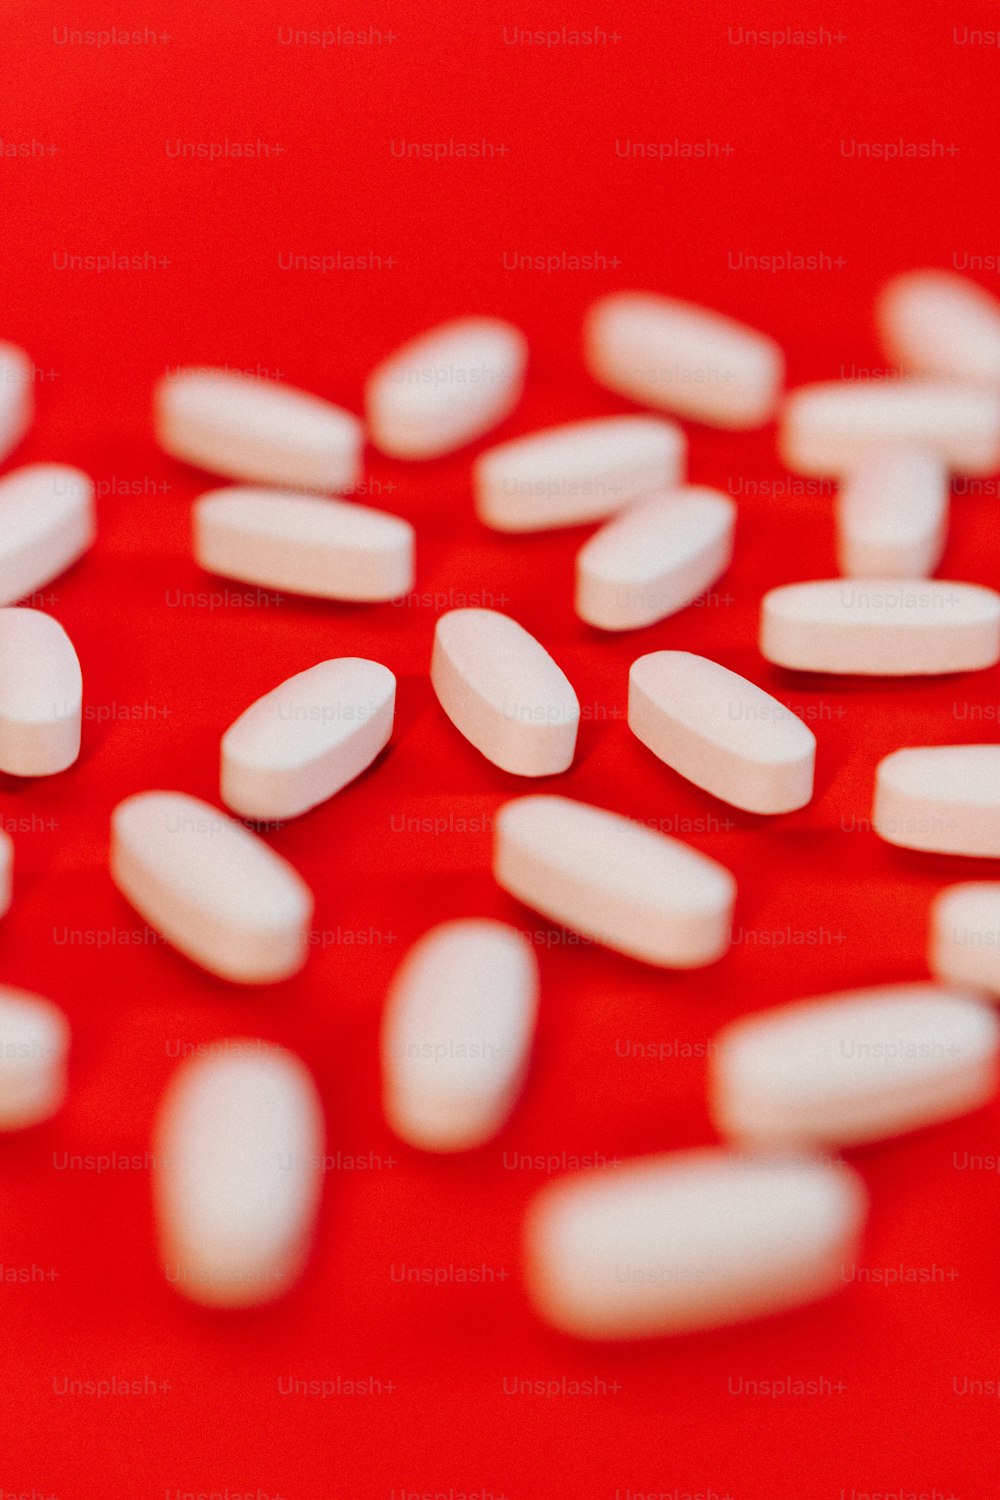 a close up of white pills on a red surface